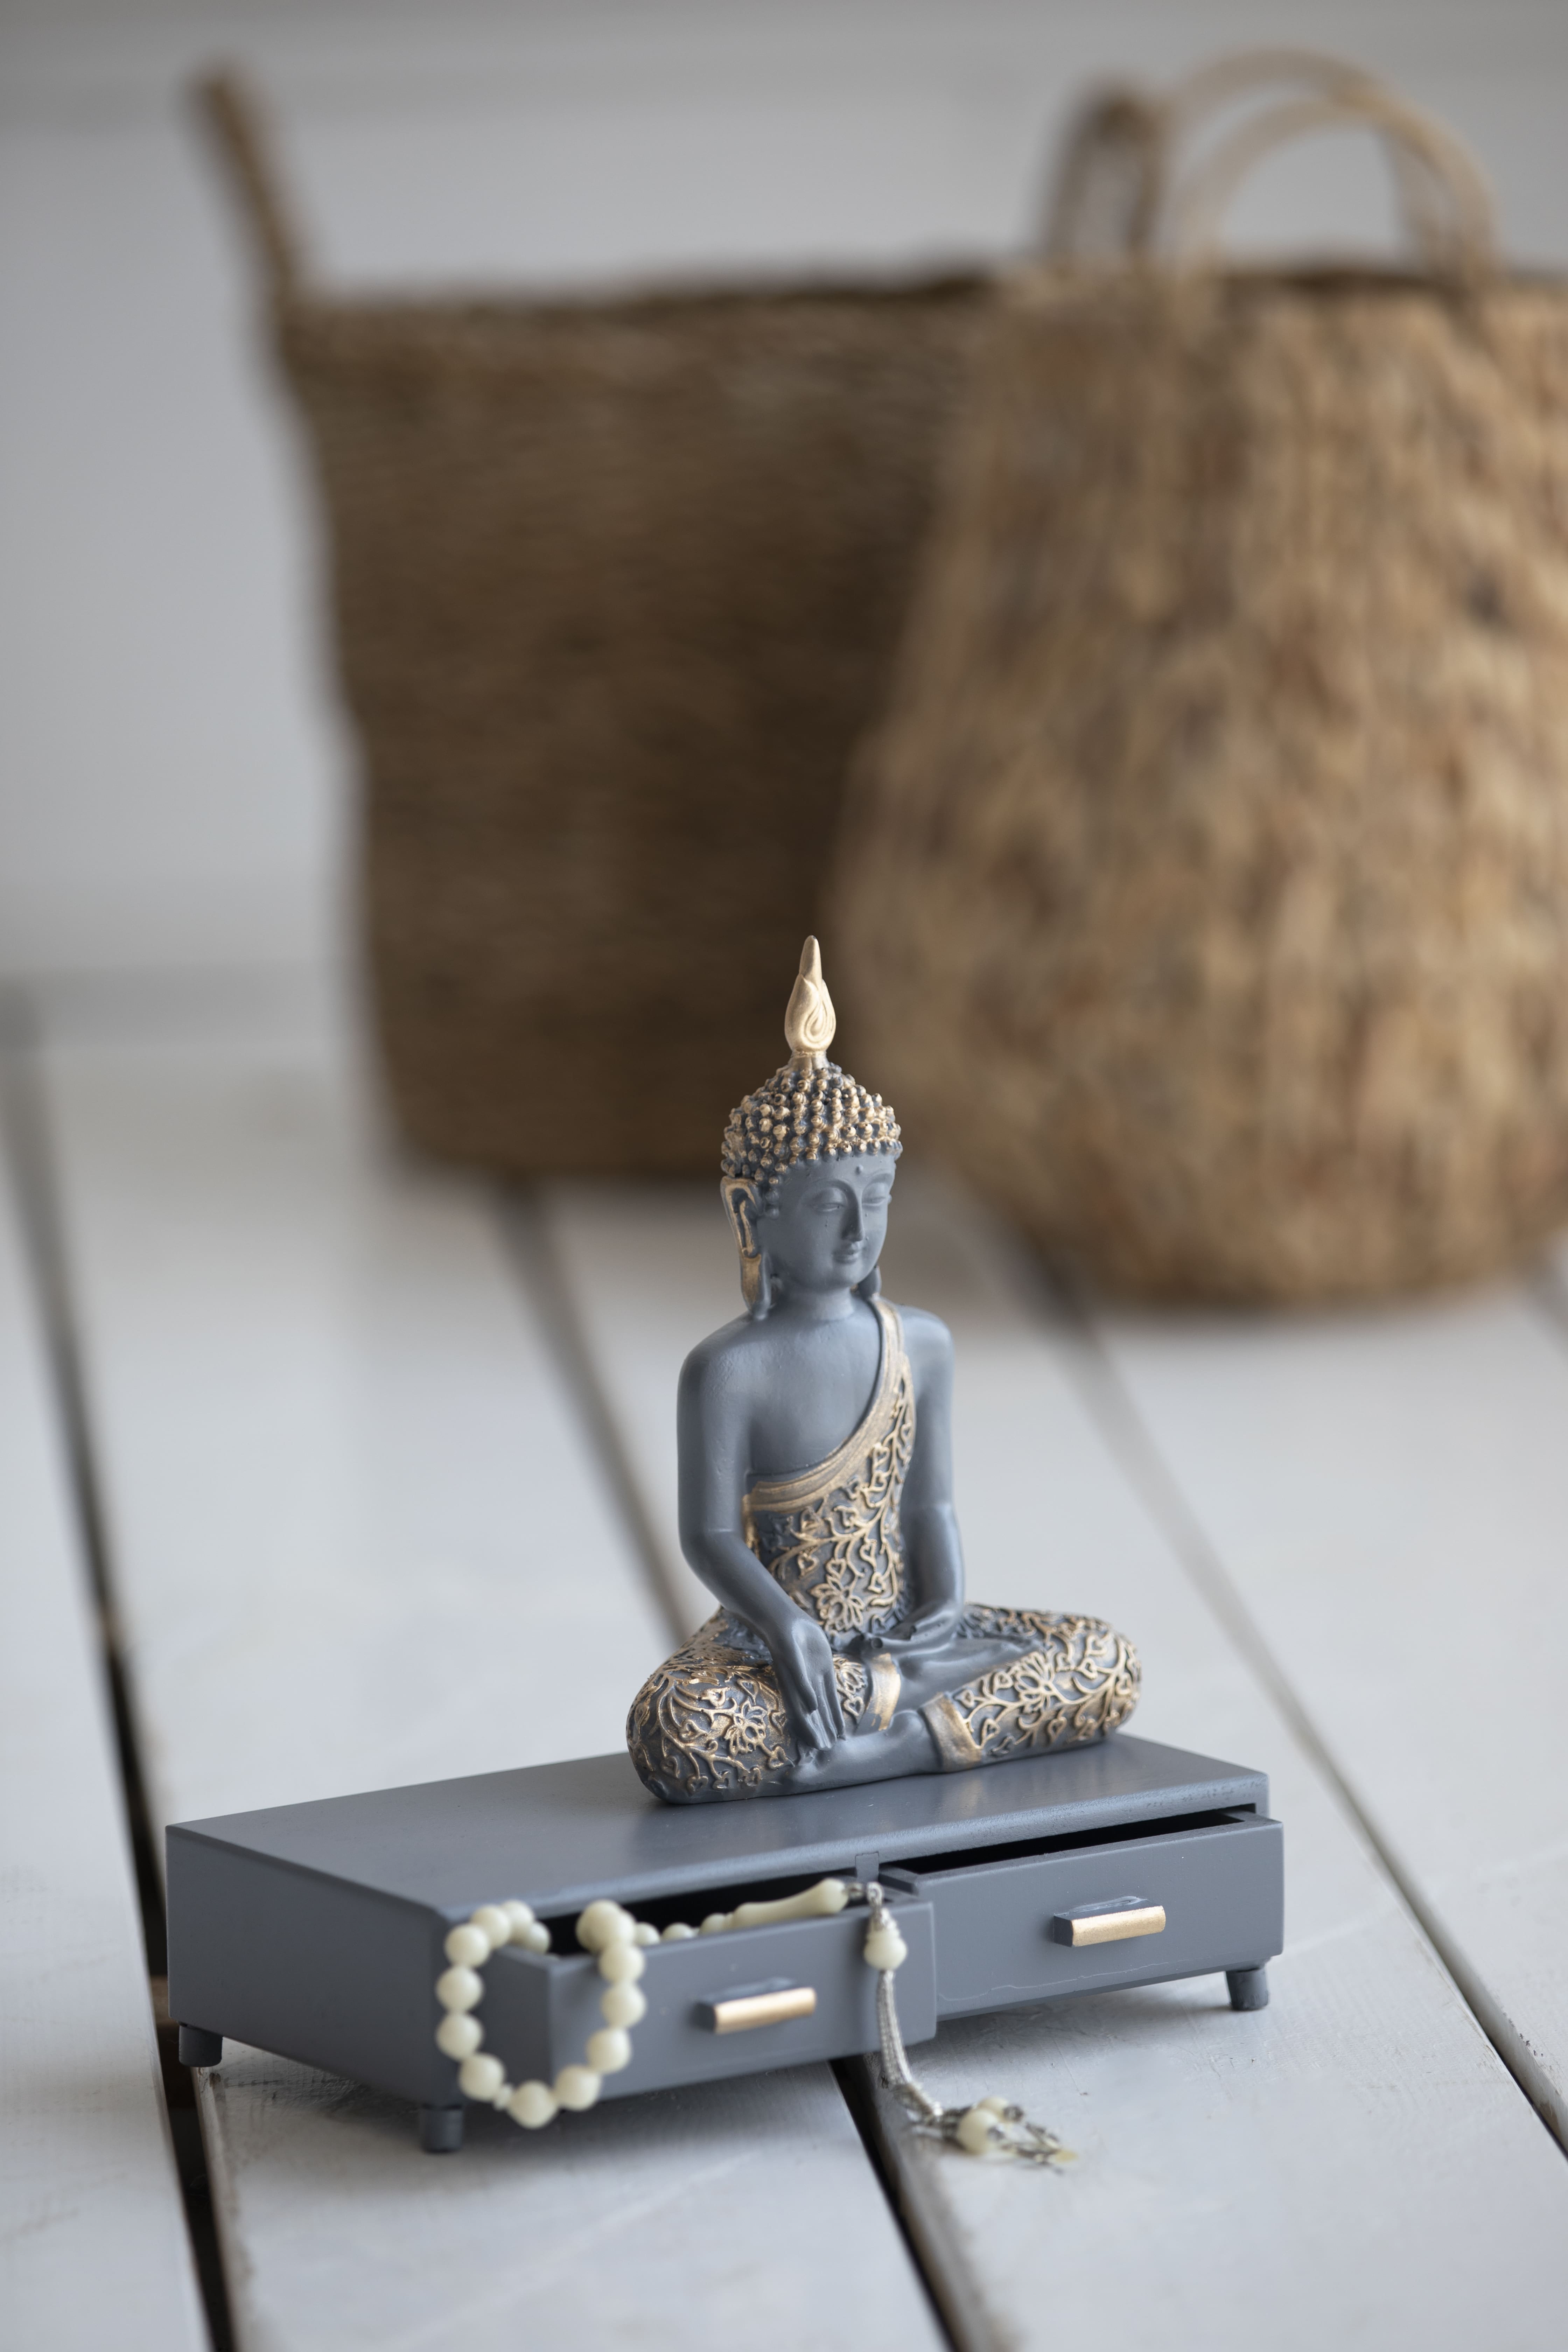 SPECIAL DESIGN BUDHA FIGURE WITH DRAWER ACCESSORY